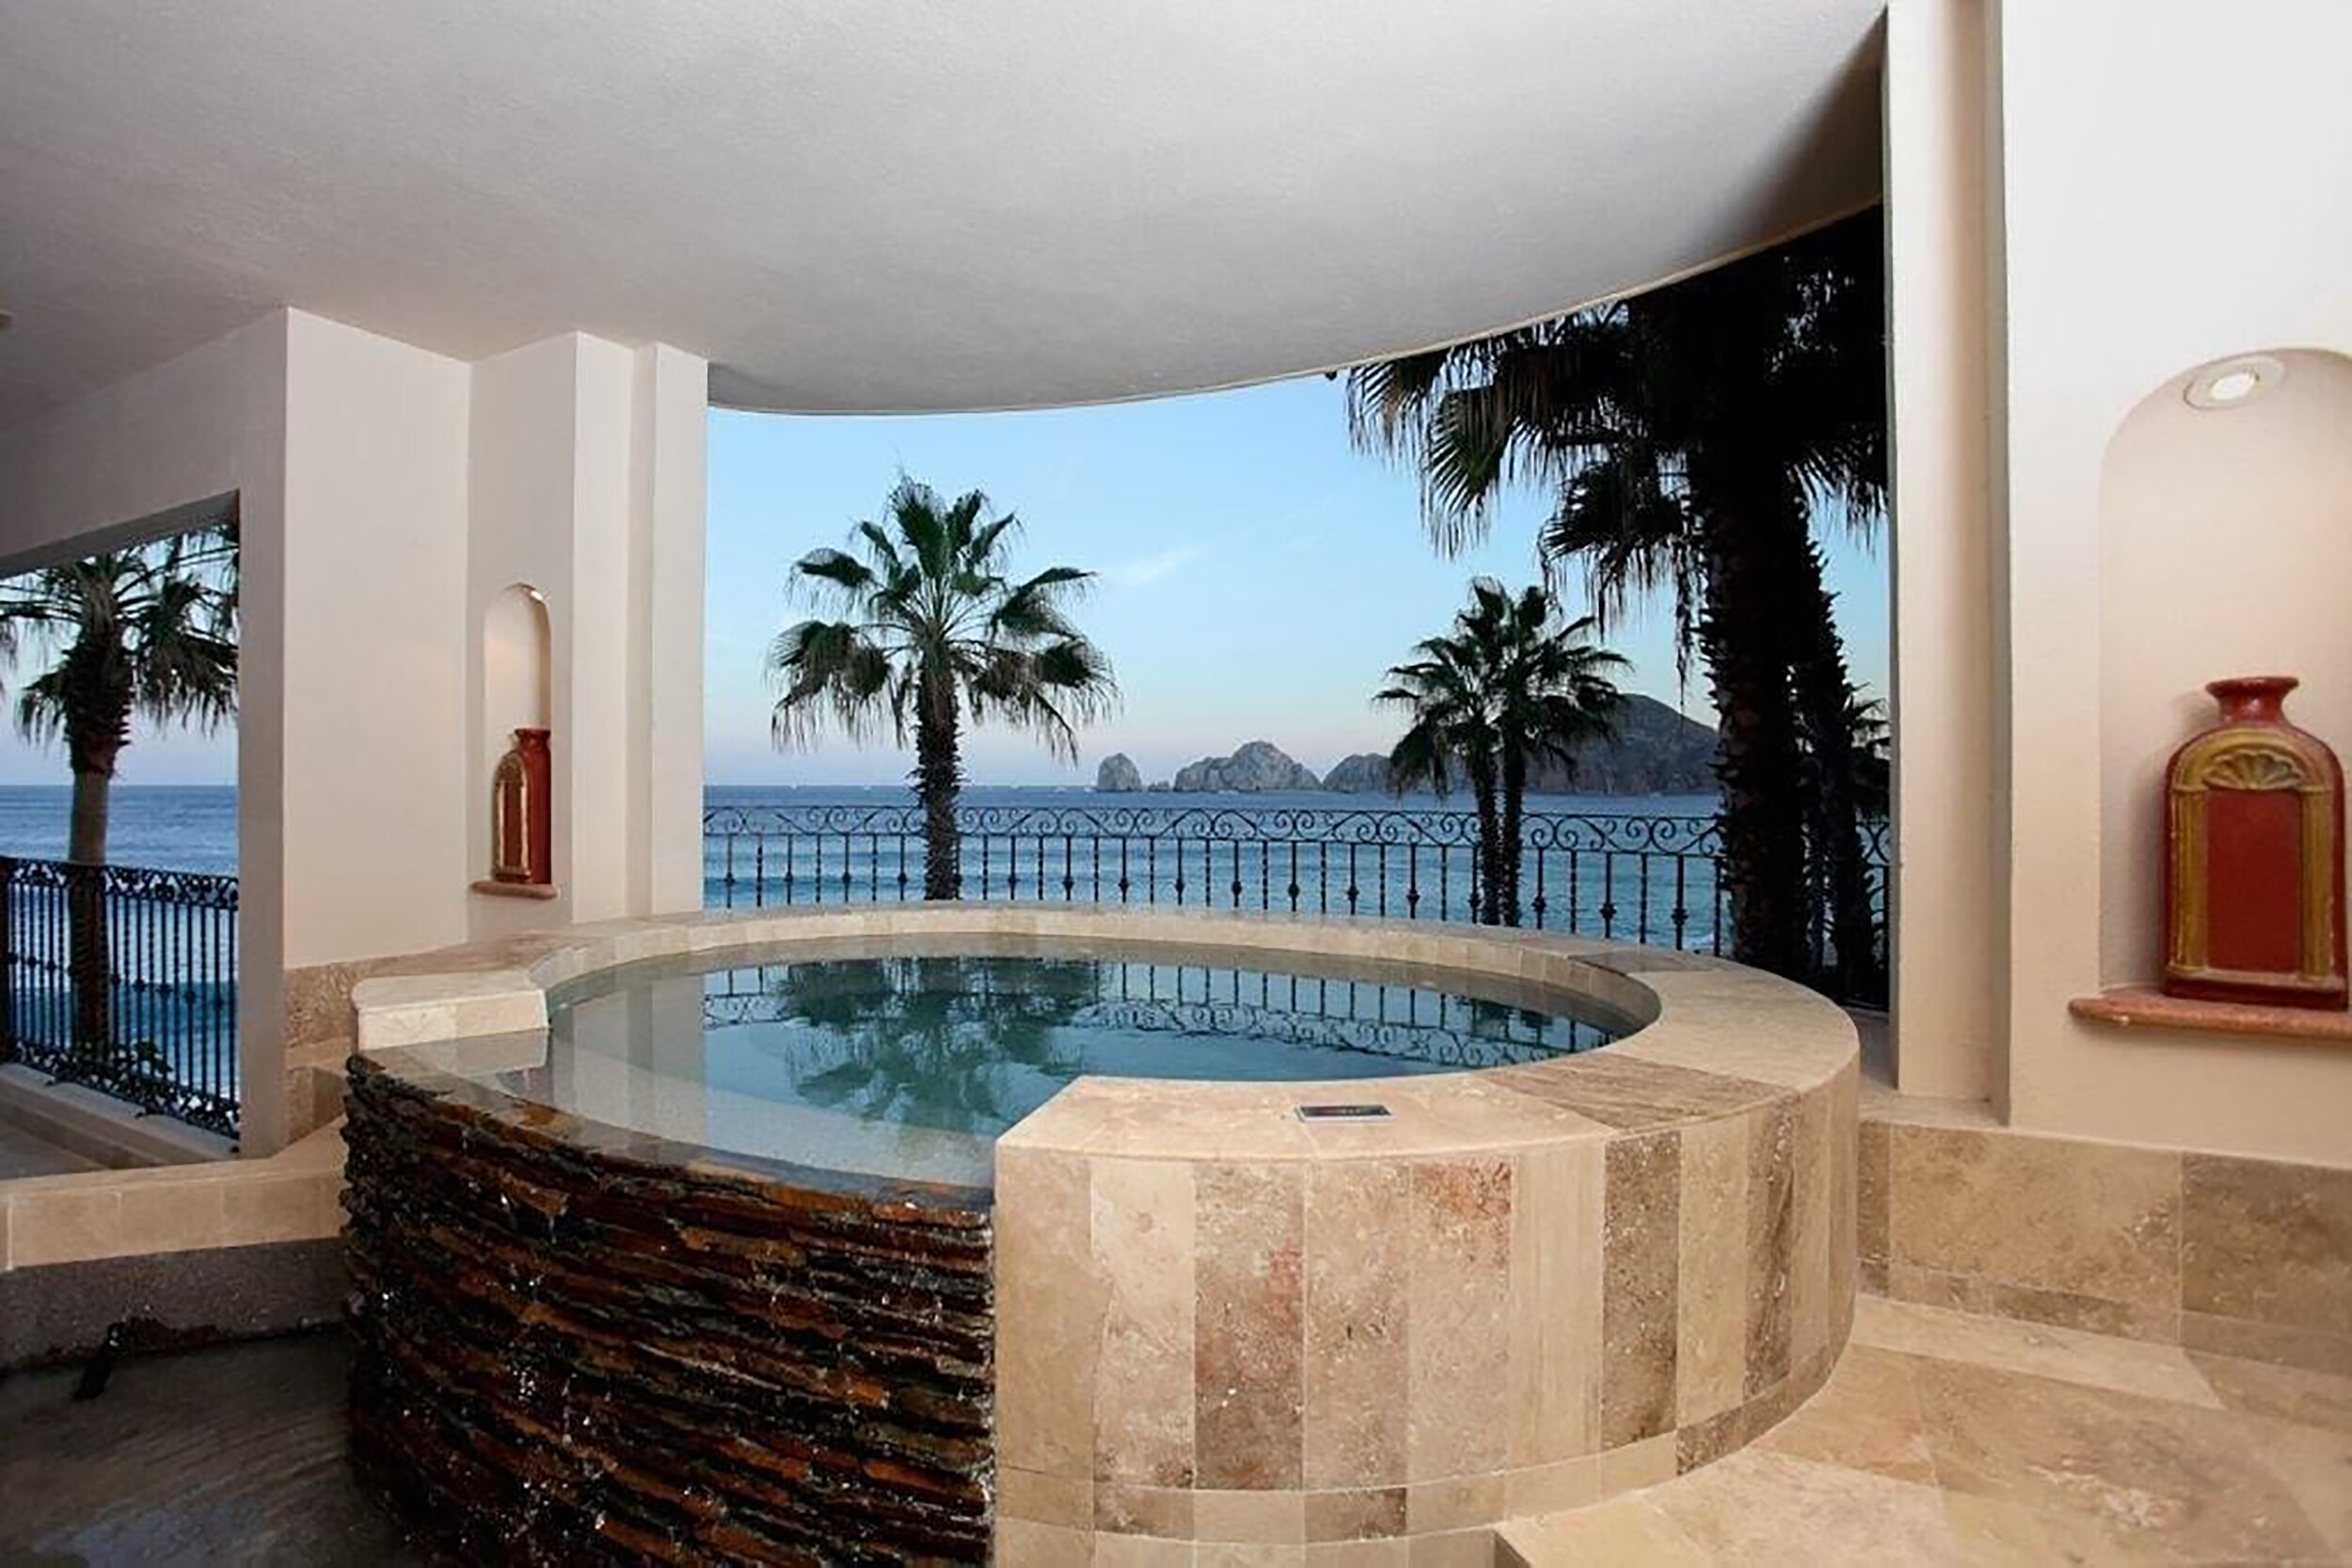 Property Image 1 - Most Incredible Ocean Views - Penthouse Style Ocean Front Villa - 3201